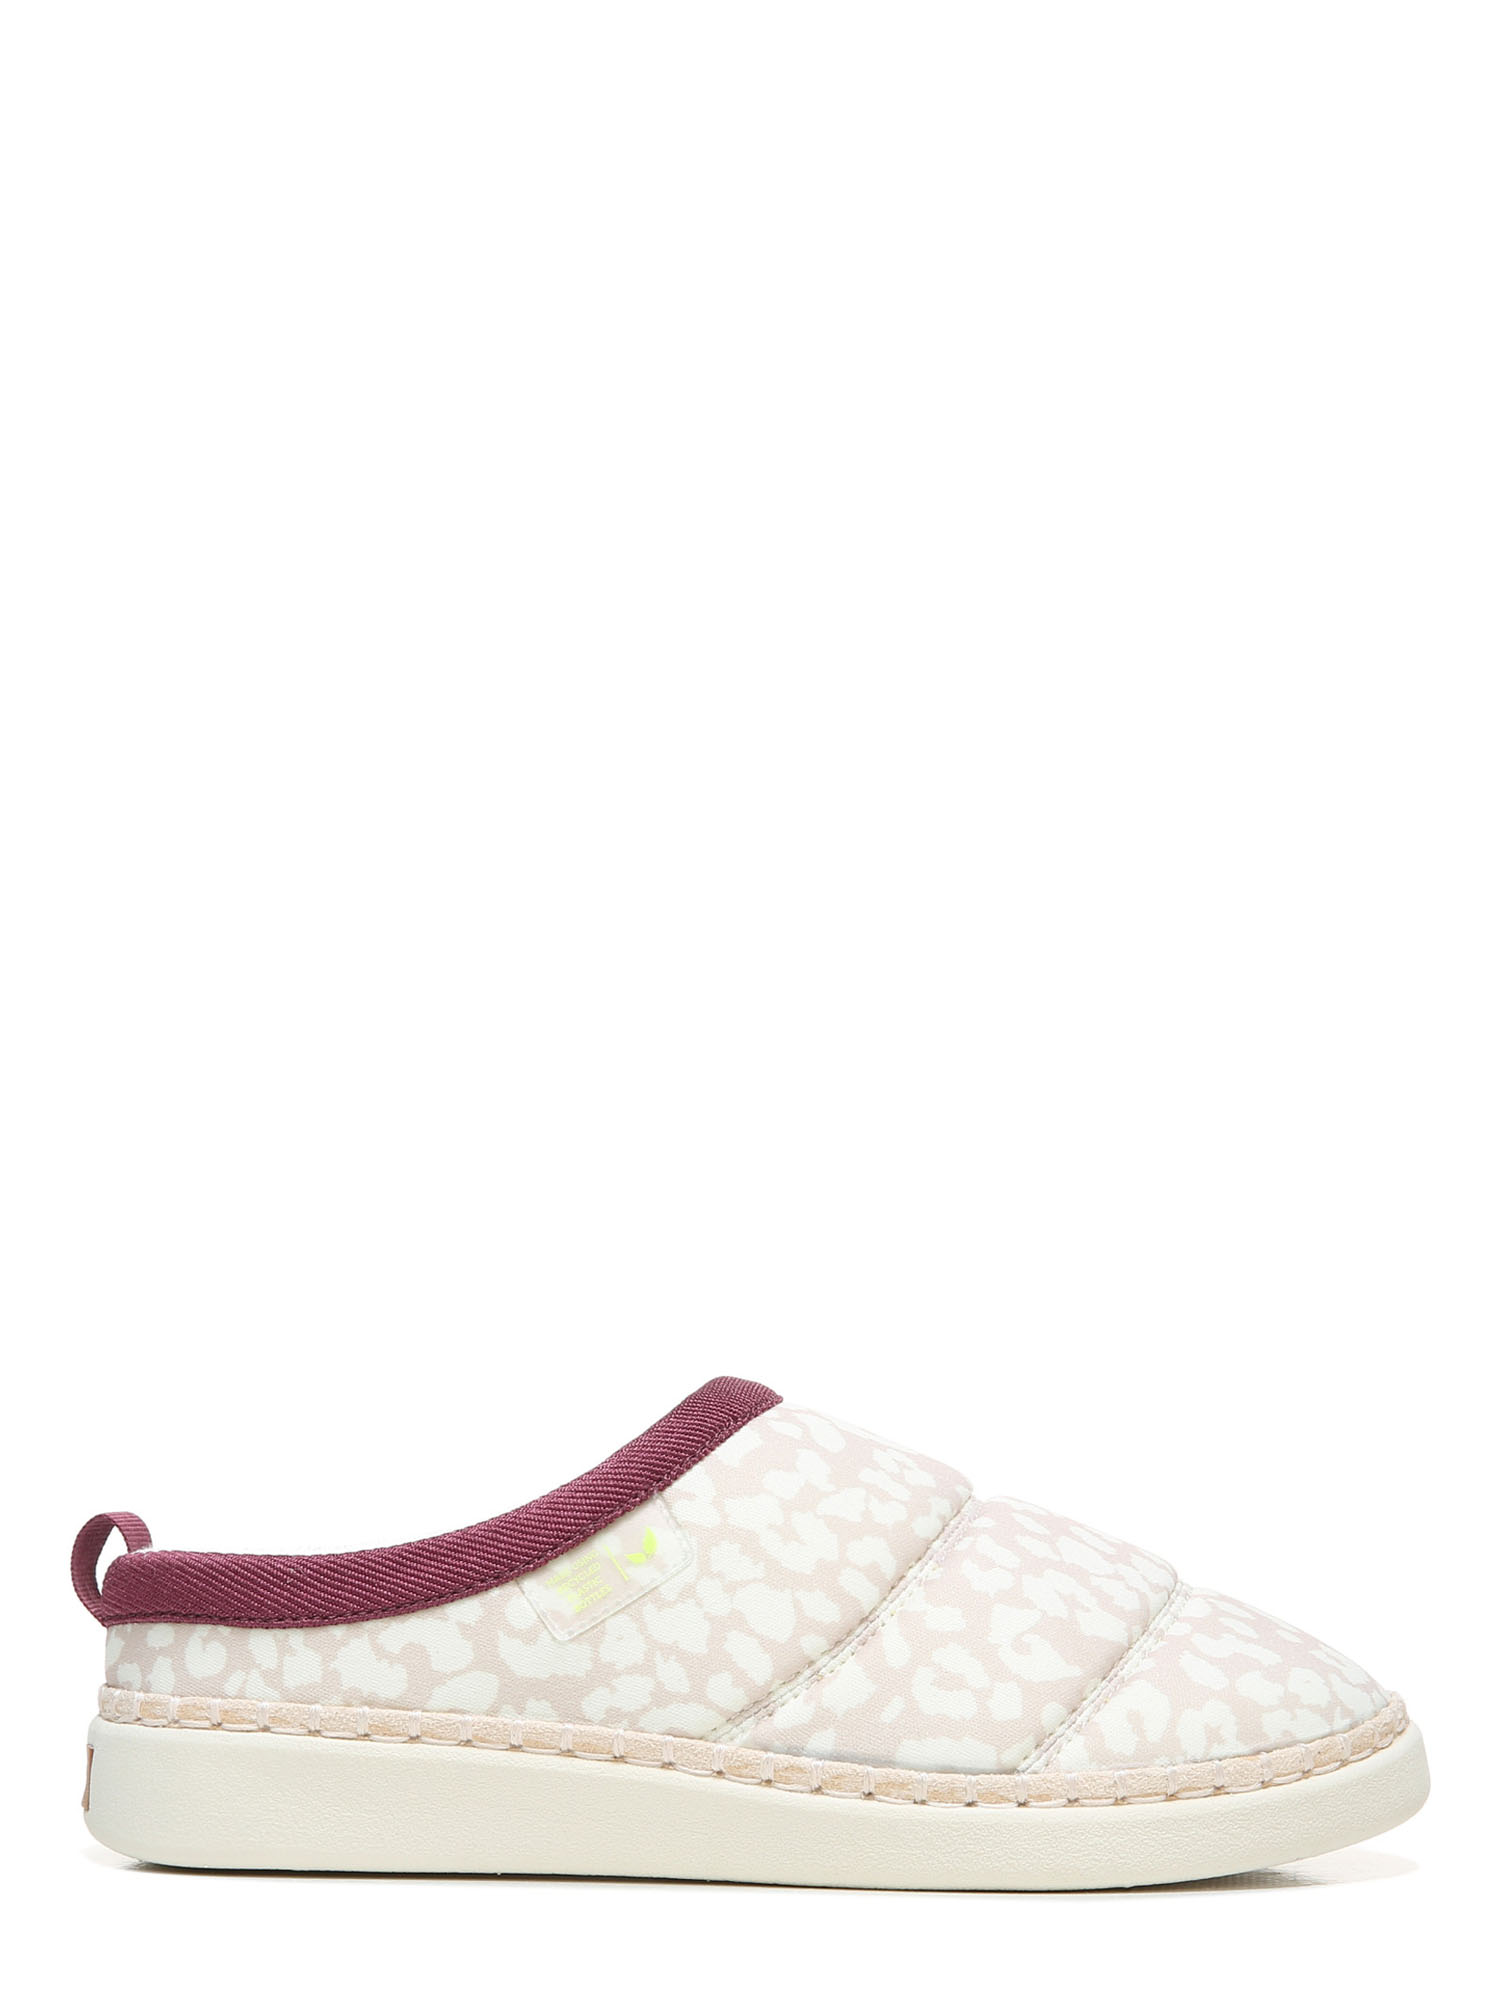 Dr. Scholl's Women's Cozy Vibes Quilted Slipper - image 5 of 6